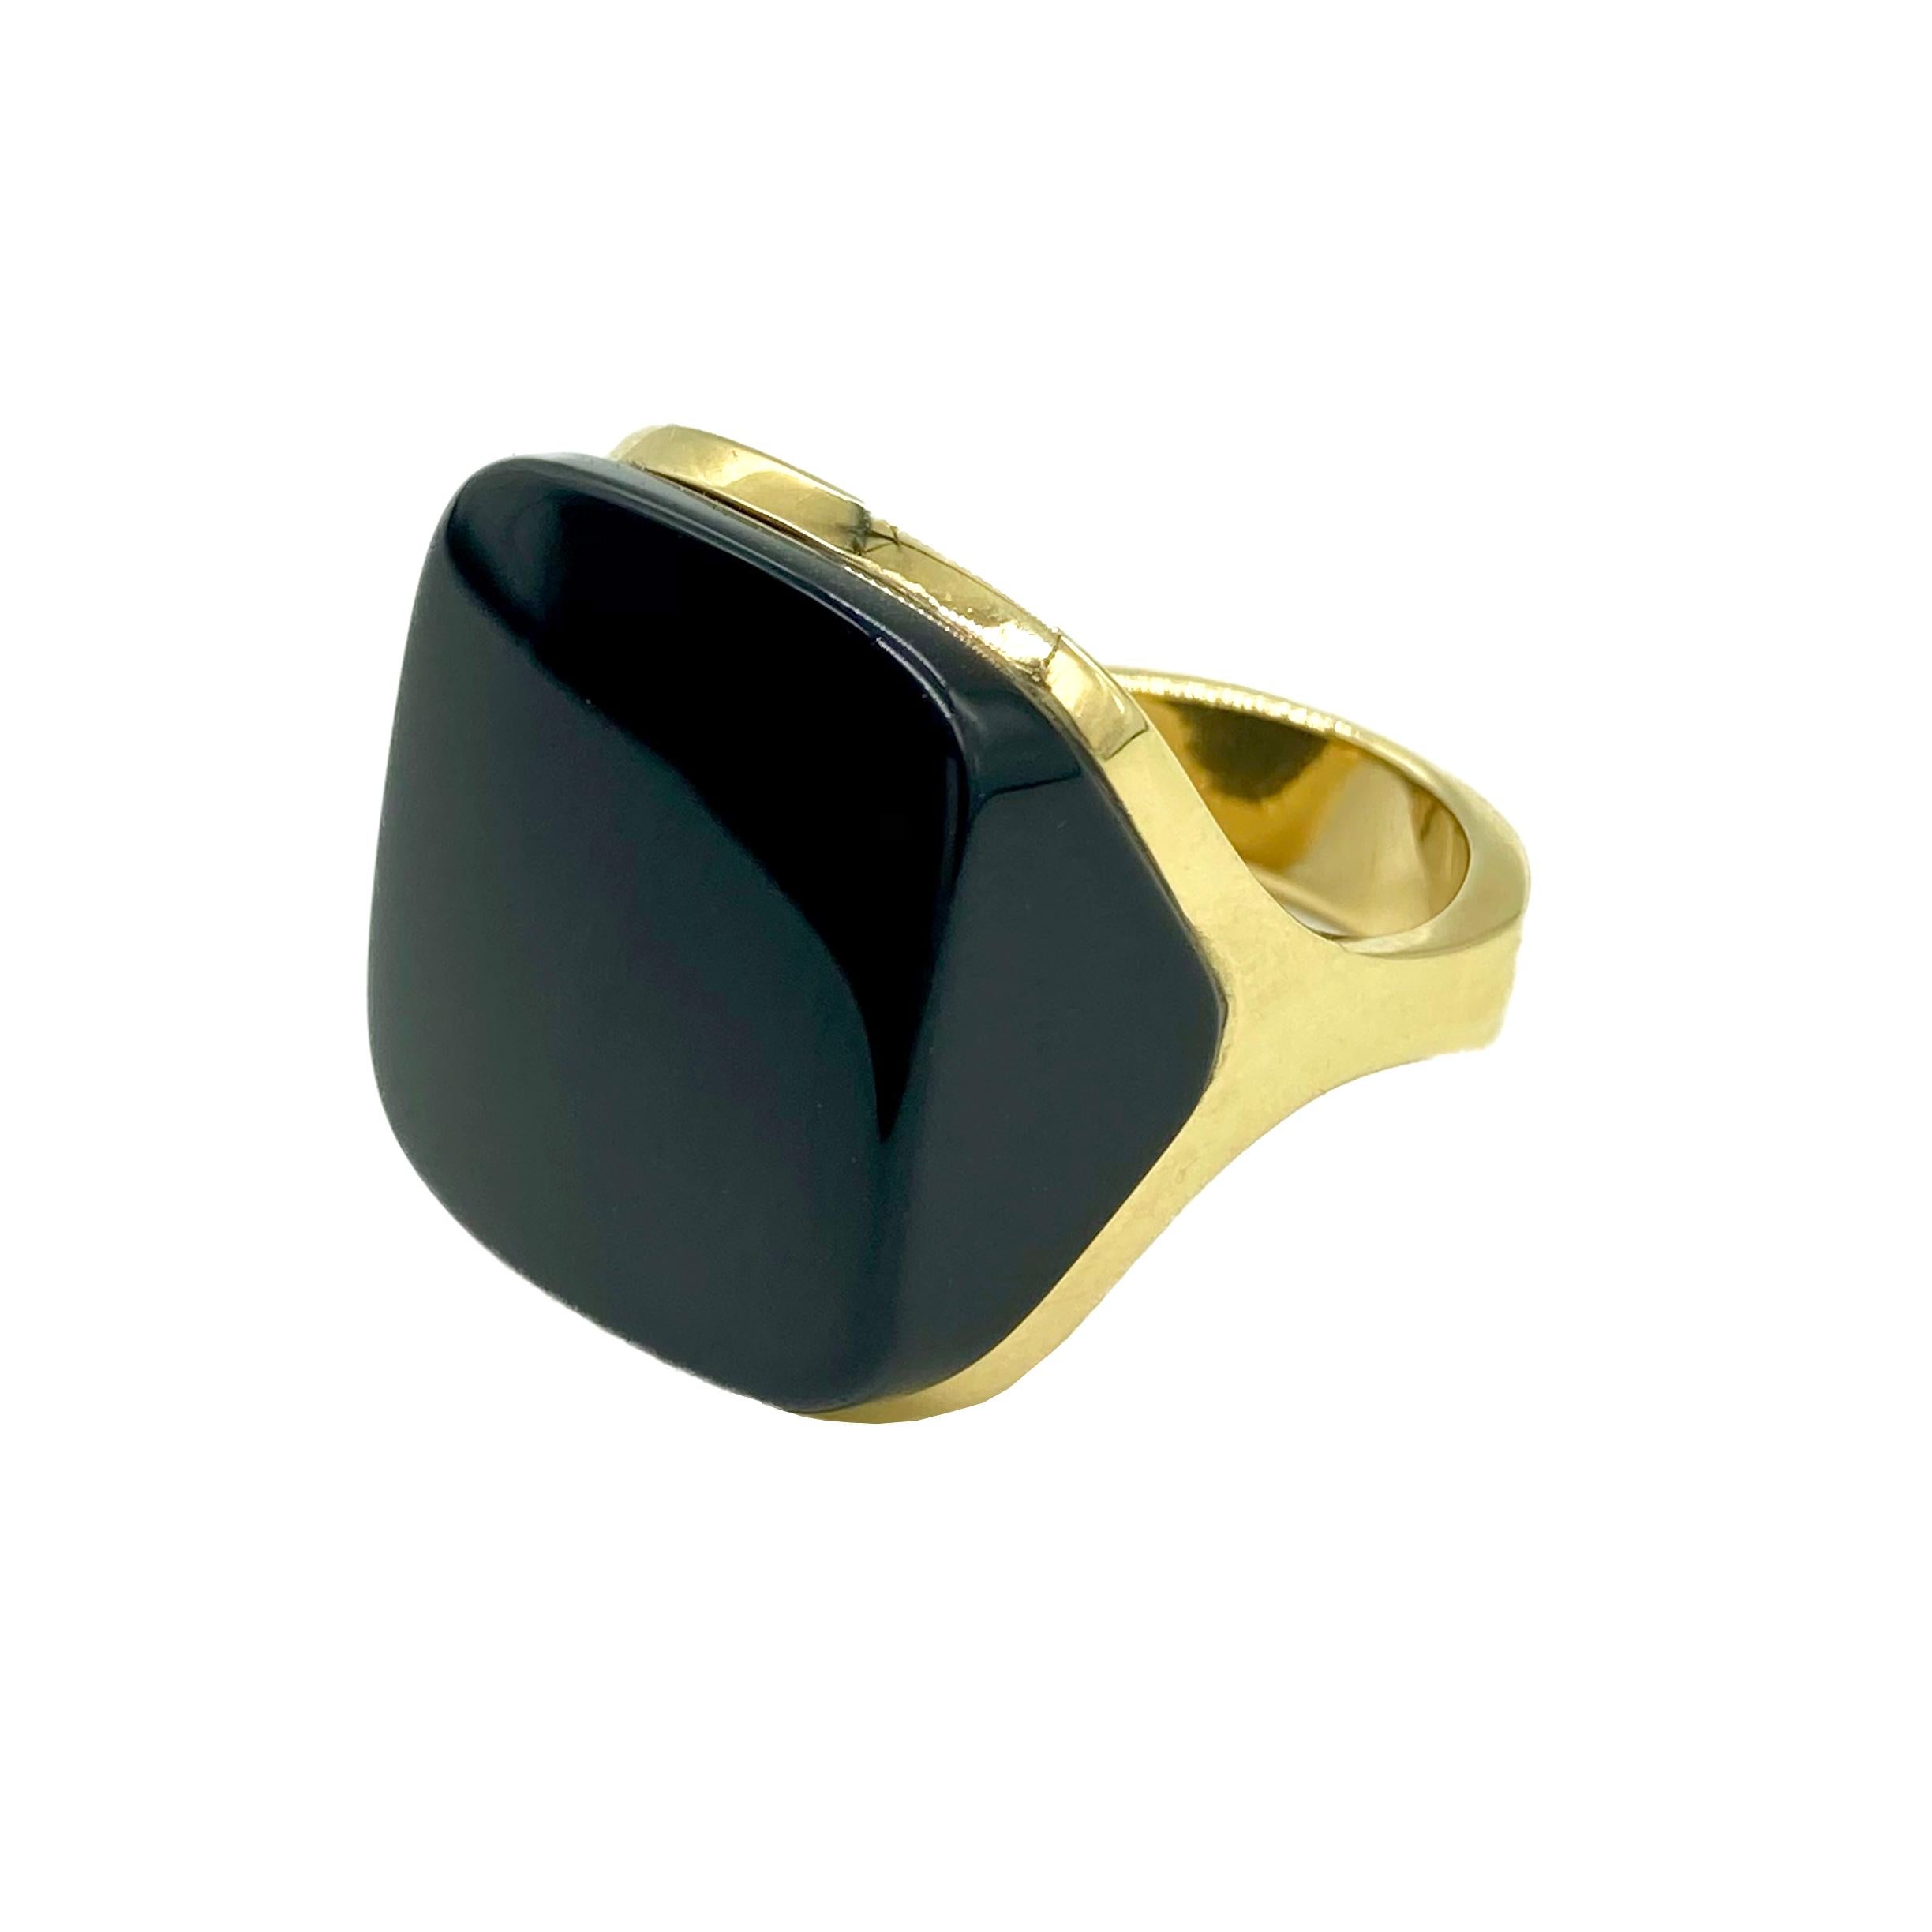 A stylish square-shaped ring in 18 karat yellow gold with black onyx. Made in the USA, circa 1970.